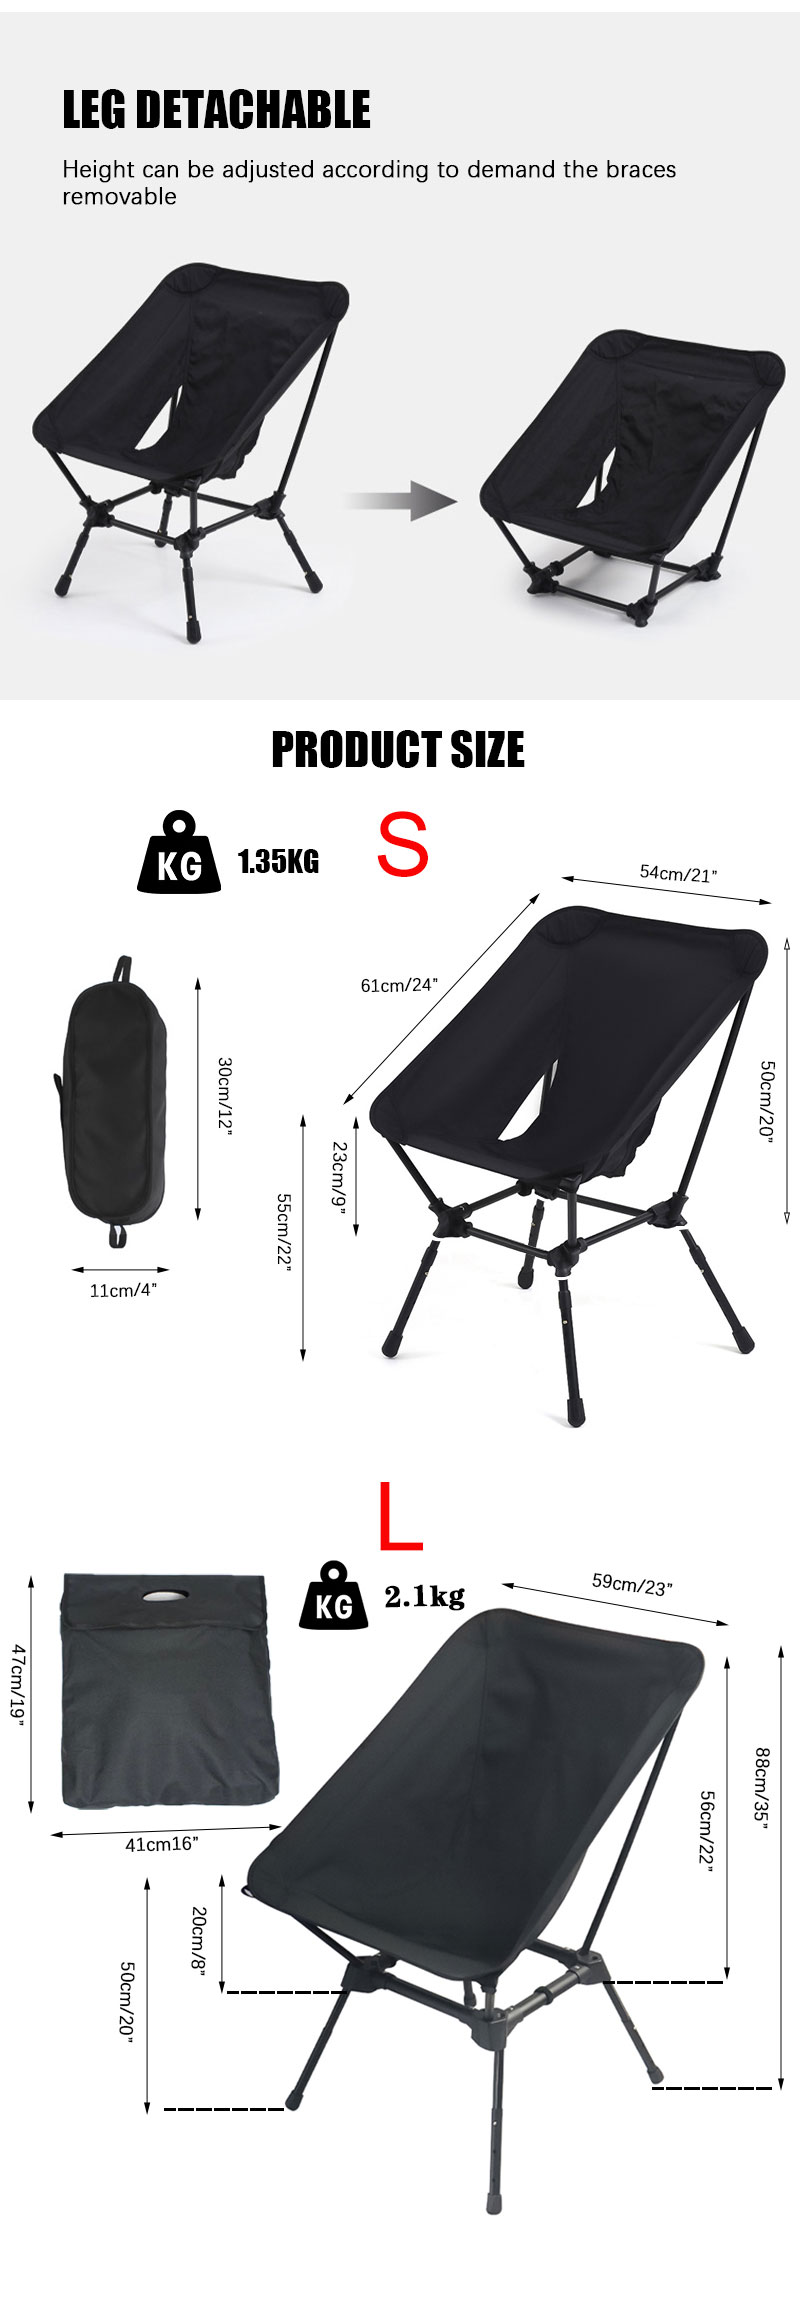 Height Adjustable Moon Camping Chair